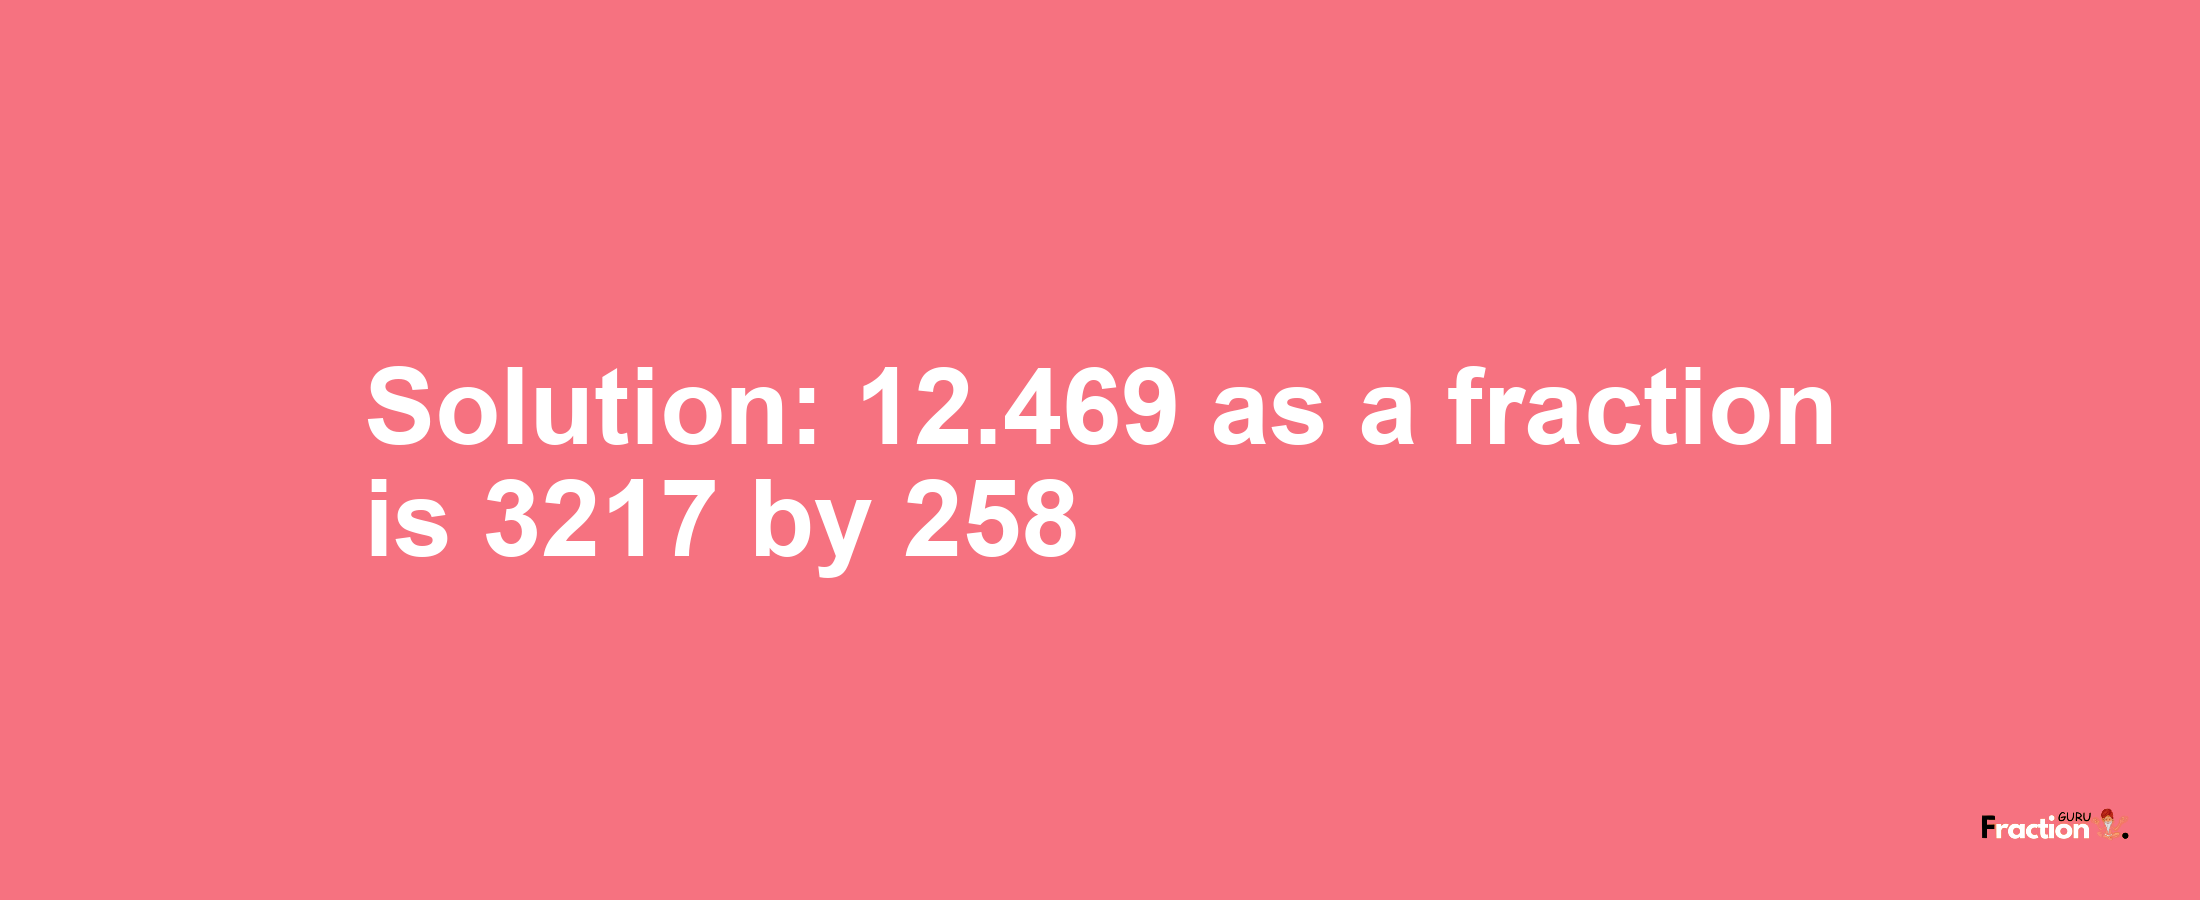 Solution:12.469 as a fraction is 3217/258